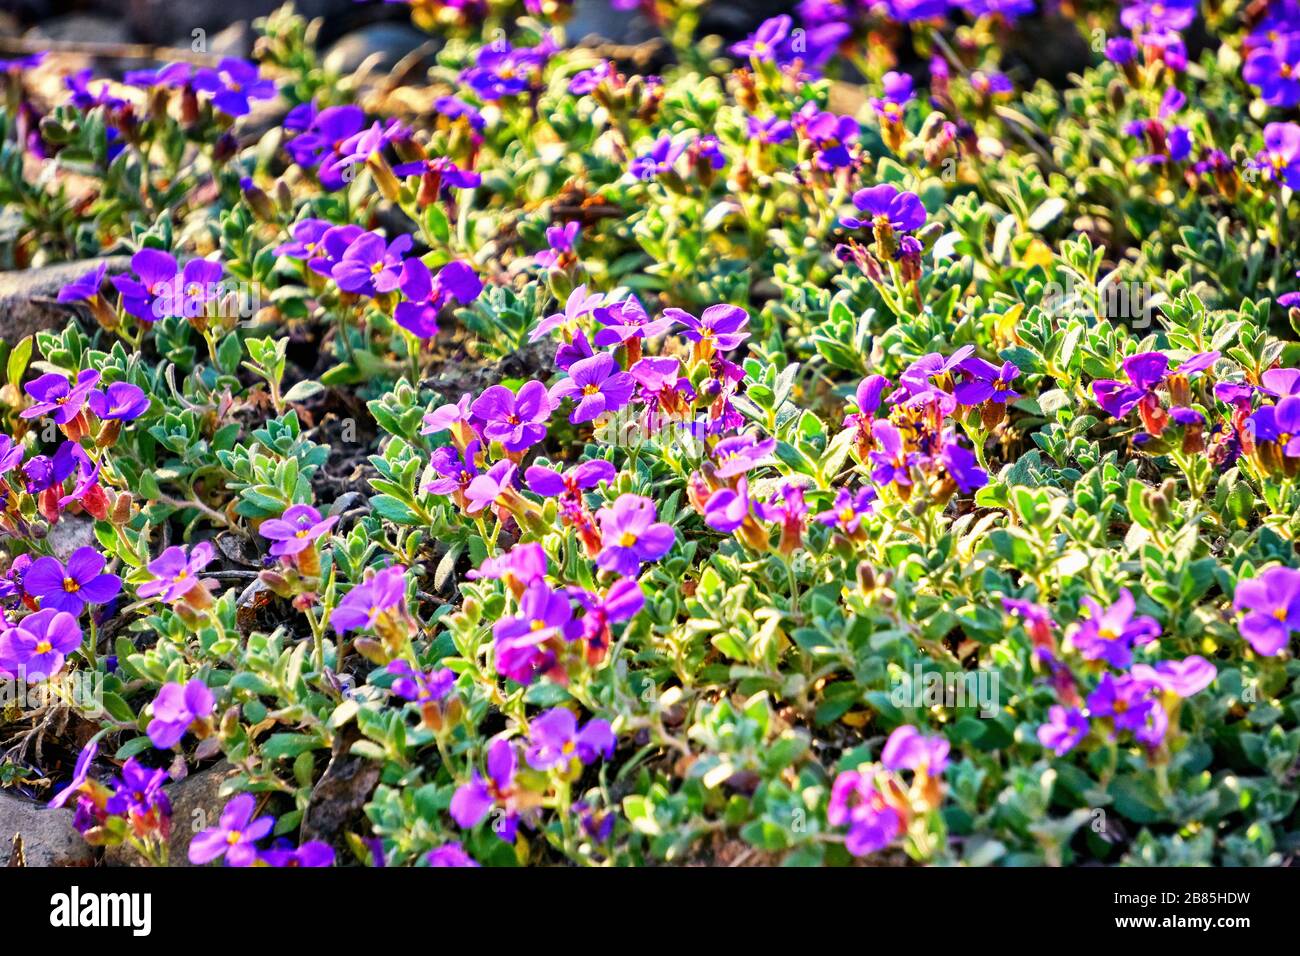 Purple flowers of the ground cover with small green leaves. Stock Photo